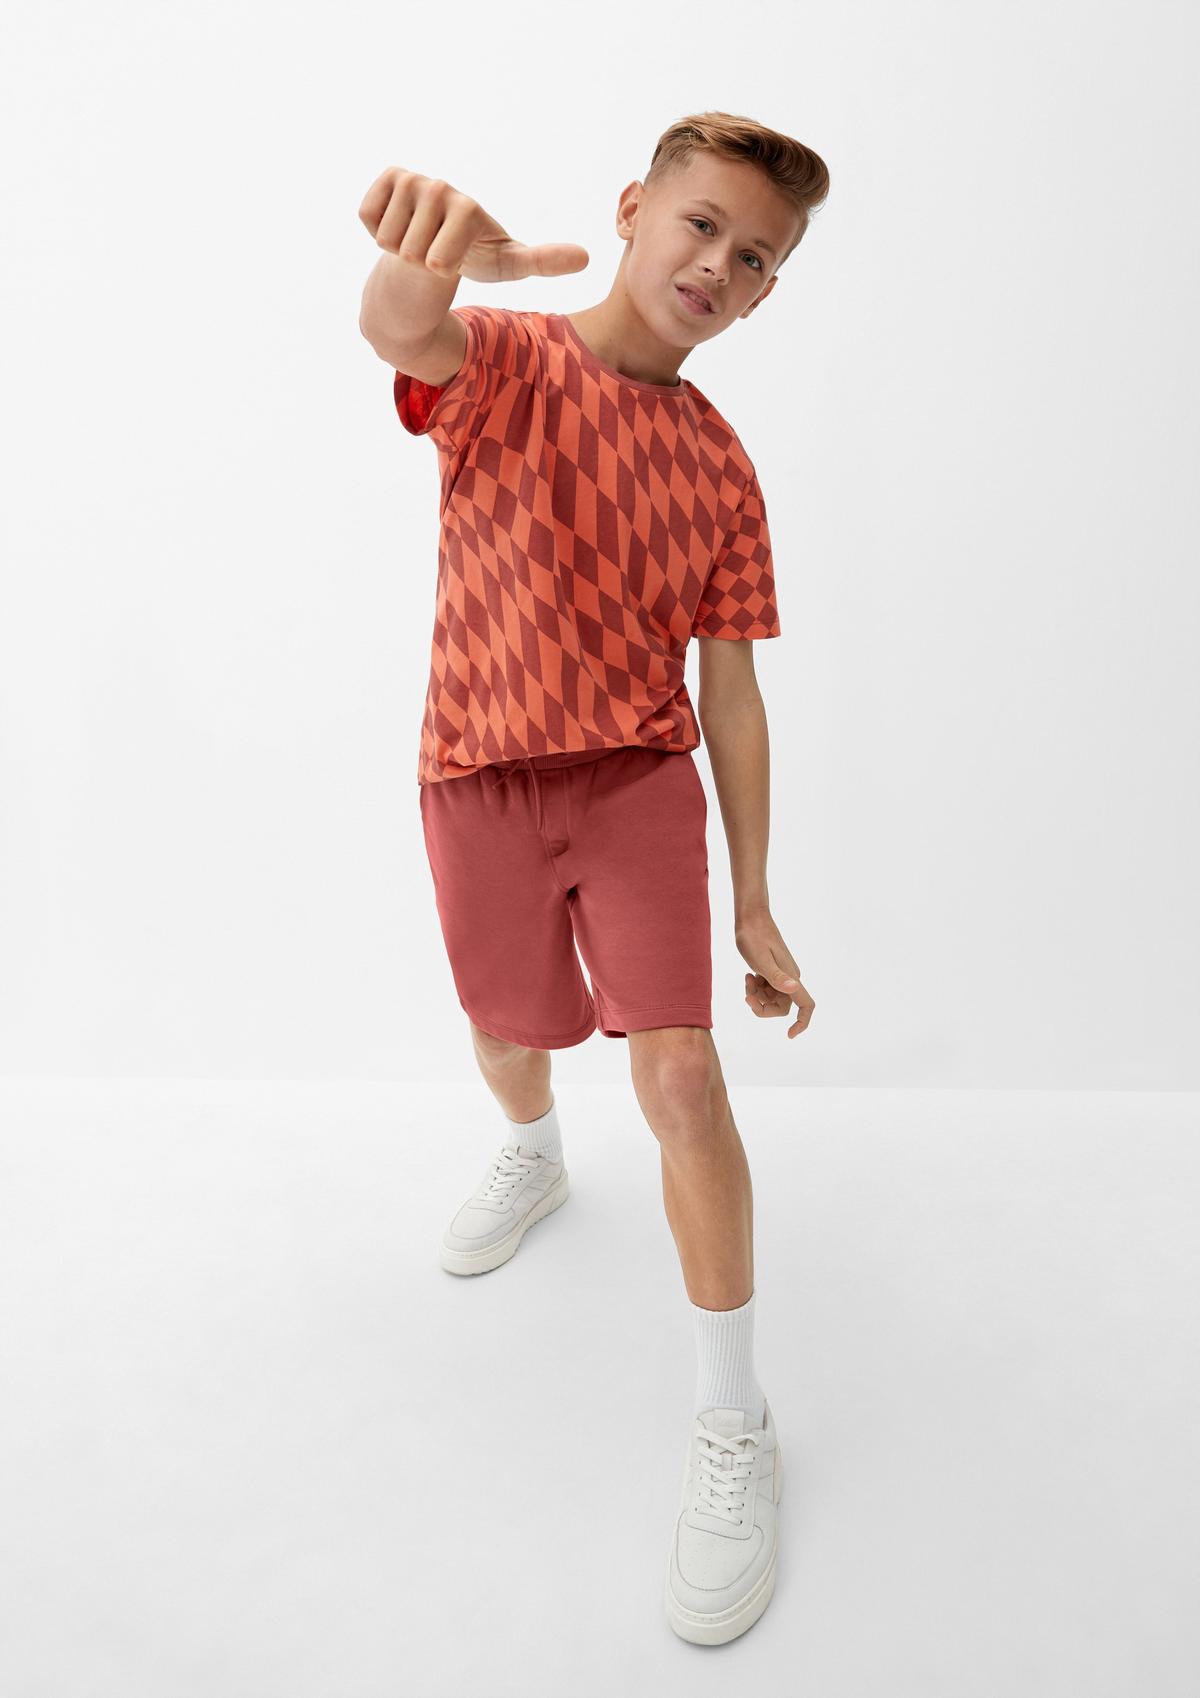 Find Bermuda shorts for boys and teens online | Bermudas